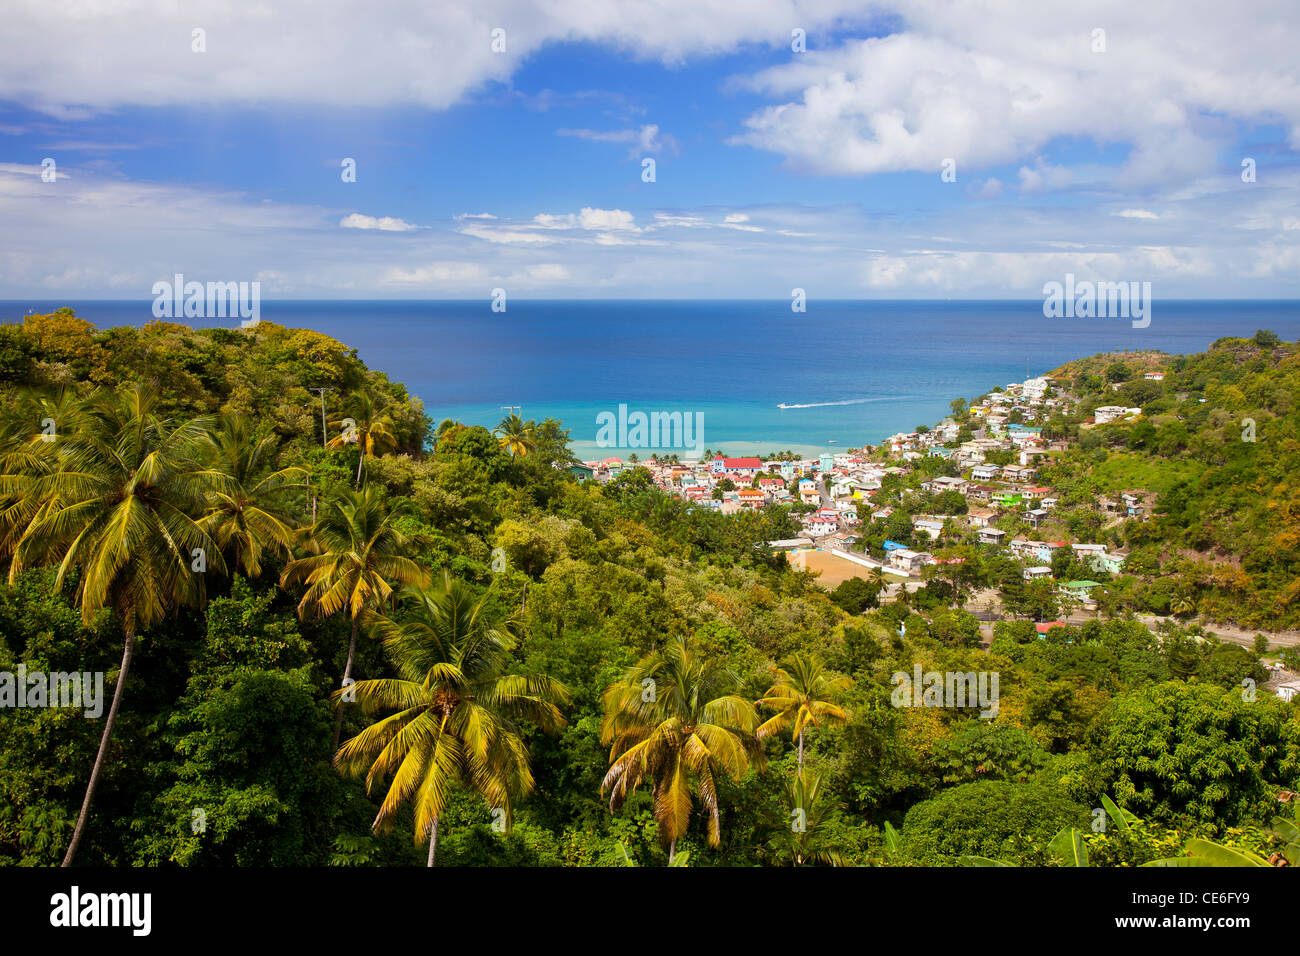 View over Canaries on the Caribbean island of St. Lucia, West Indies Stock Photo